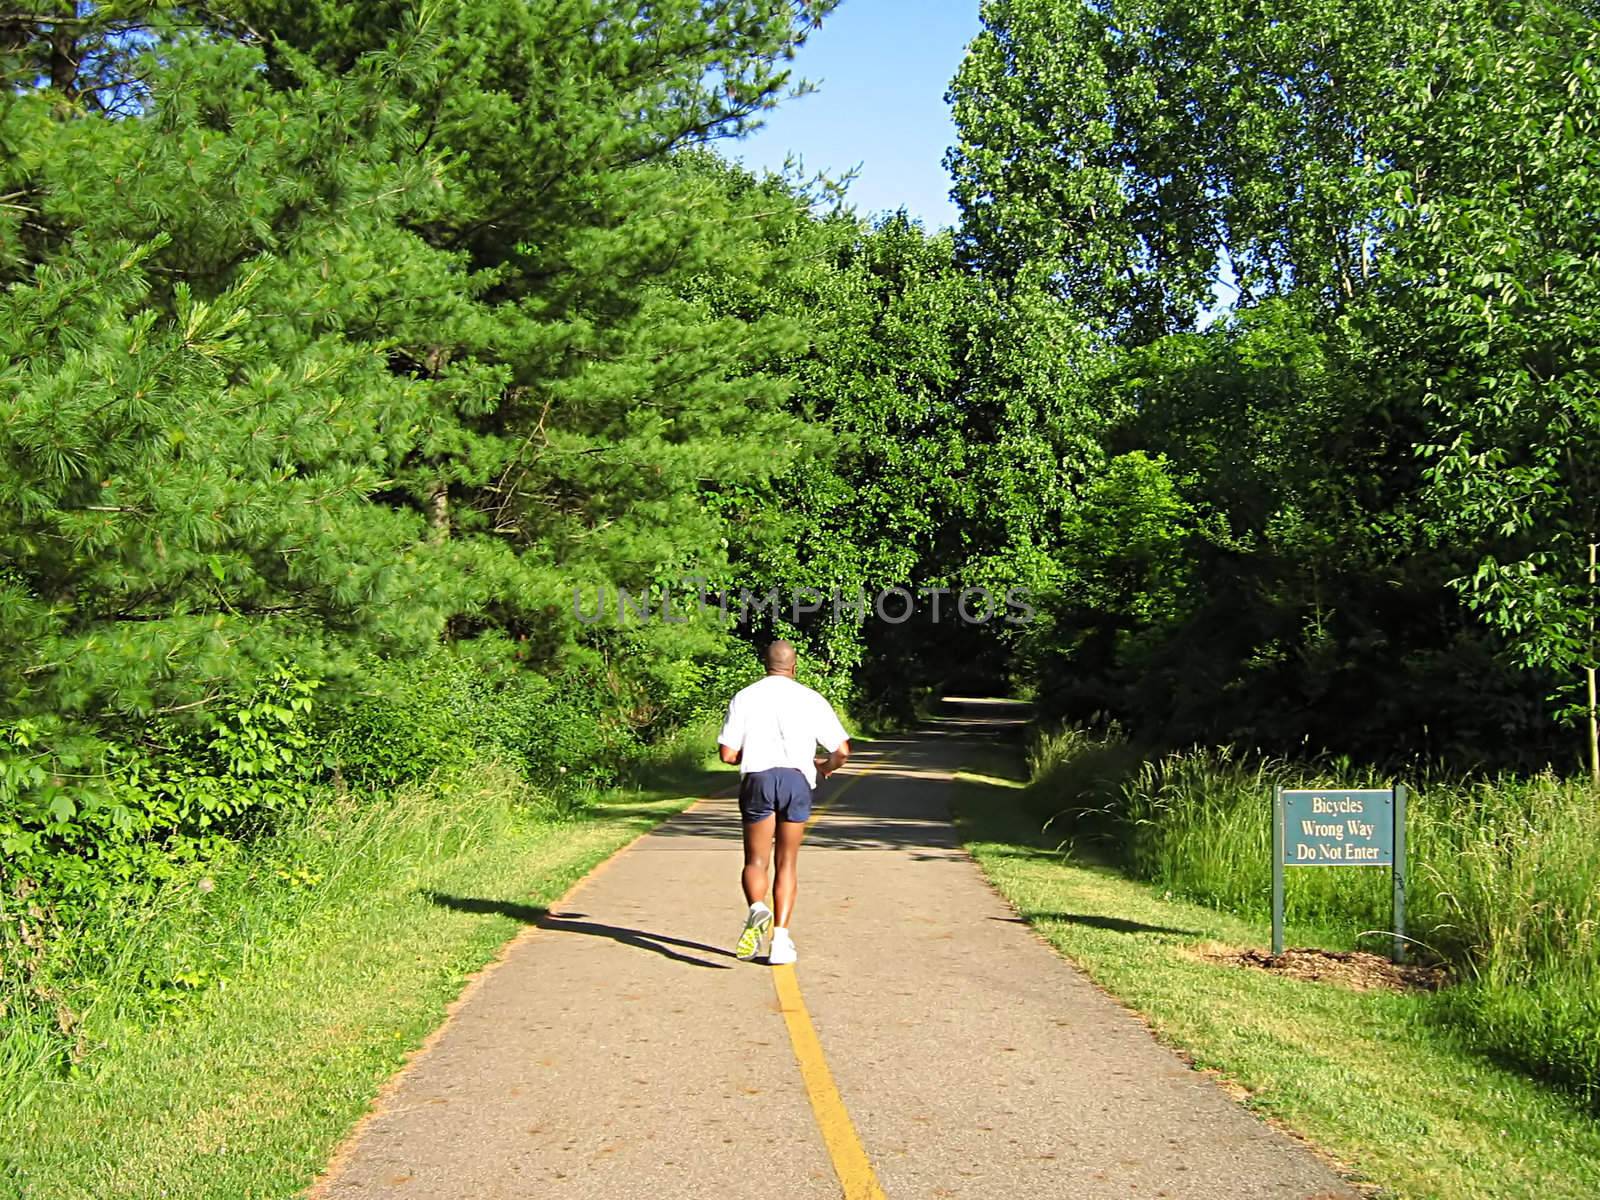 A photograph of a person running along a trail.